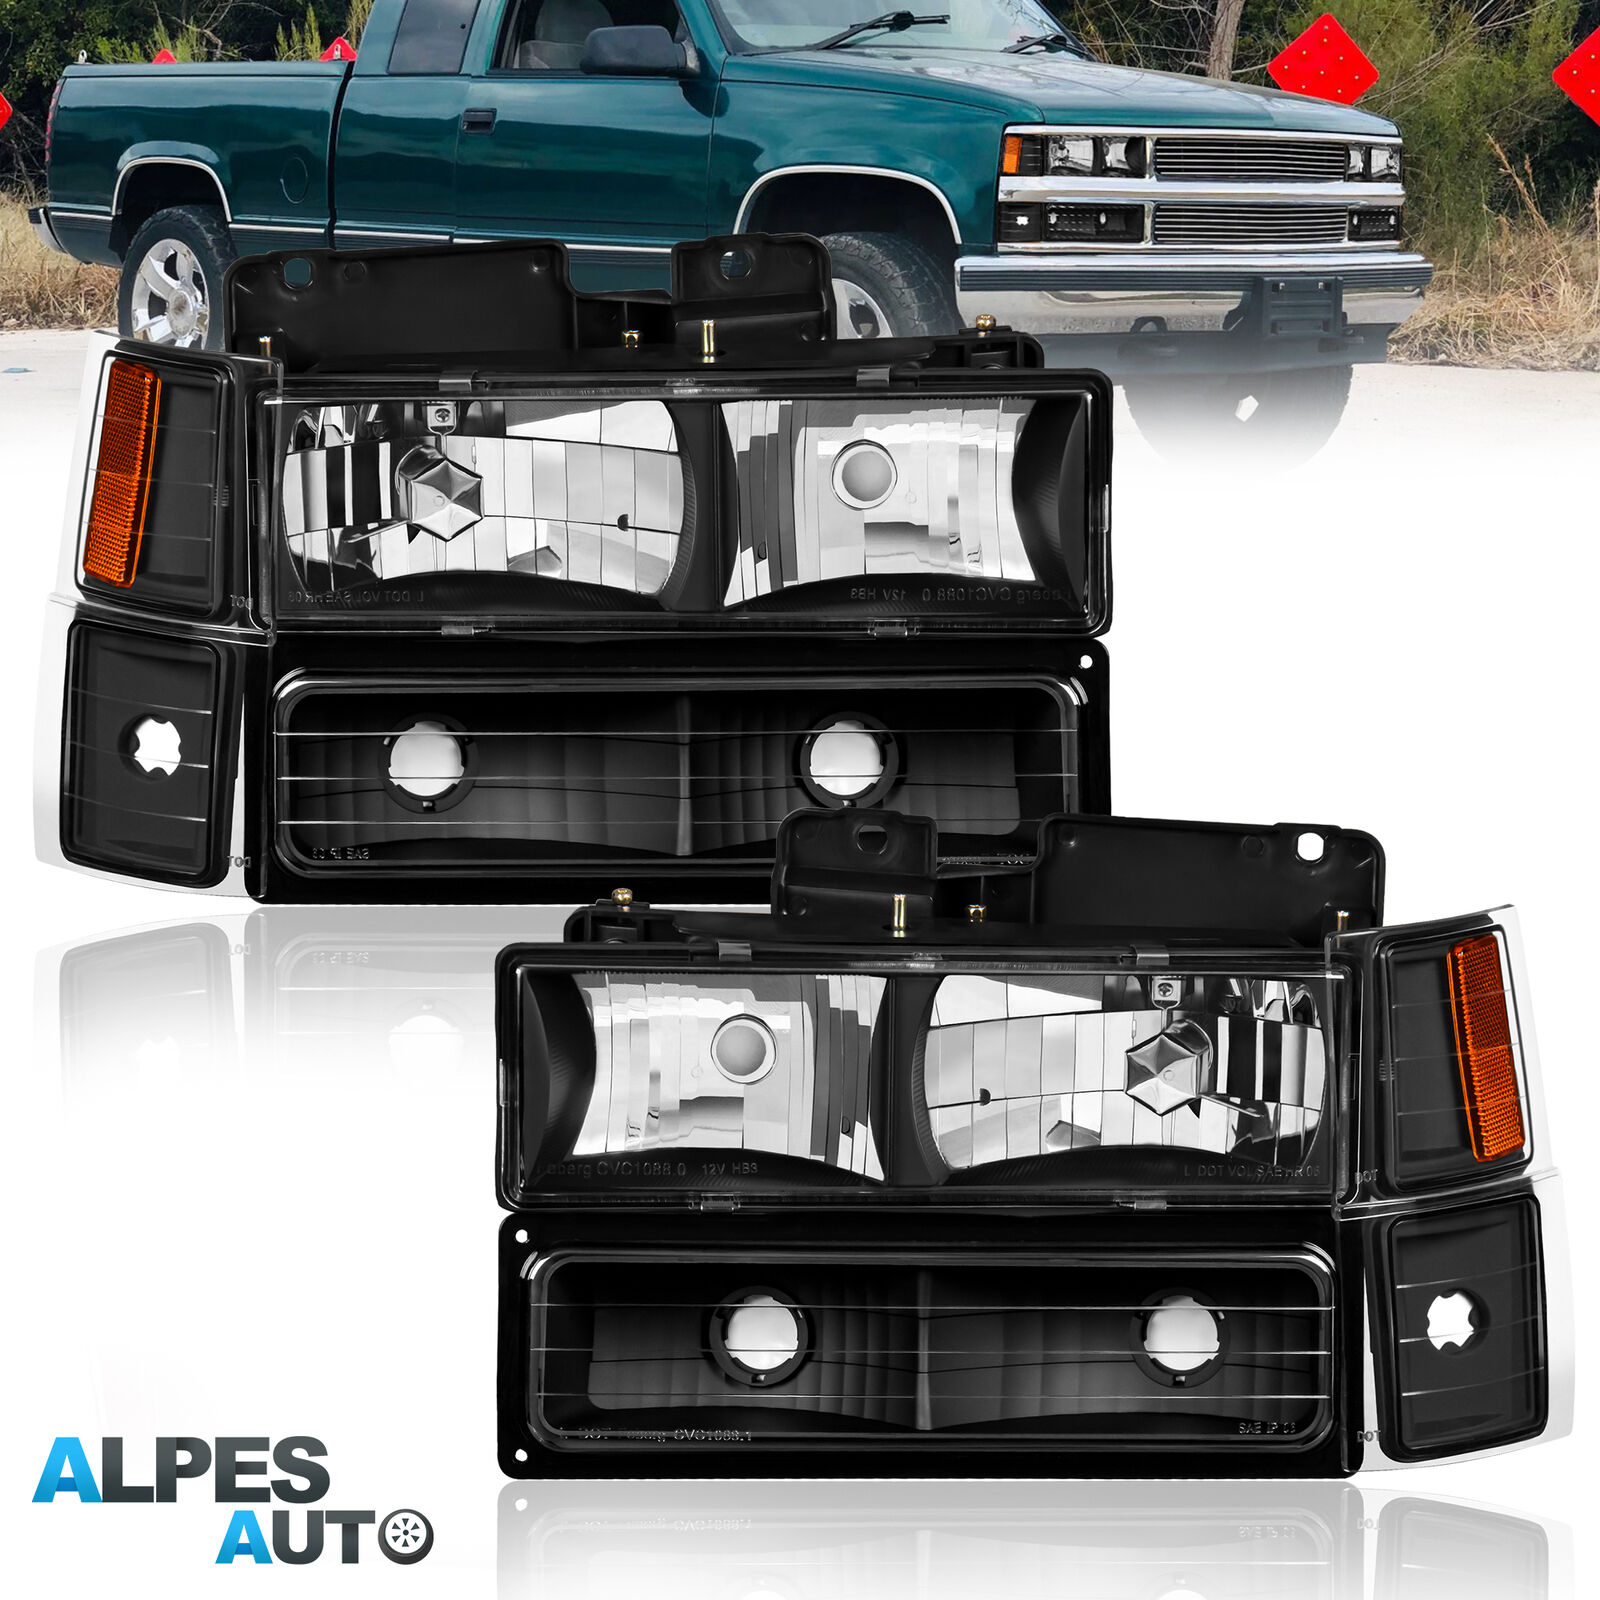 2PCS Headlights Assembly & Bumper Lamps For 1995-1999 Chevy C/K 1500 2500 Tahoe